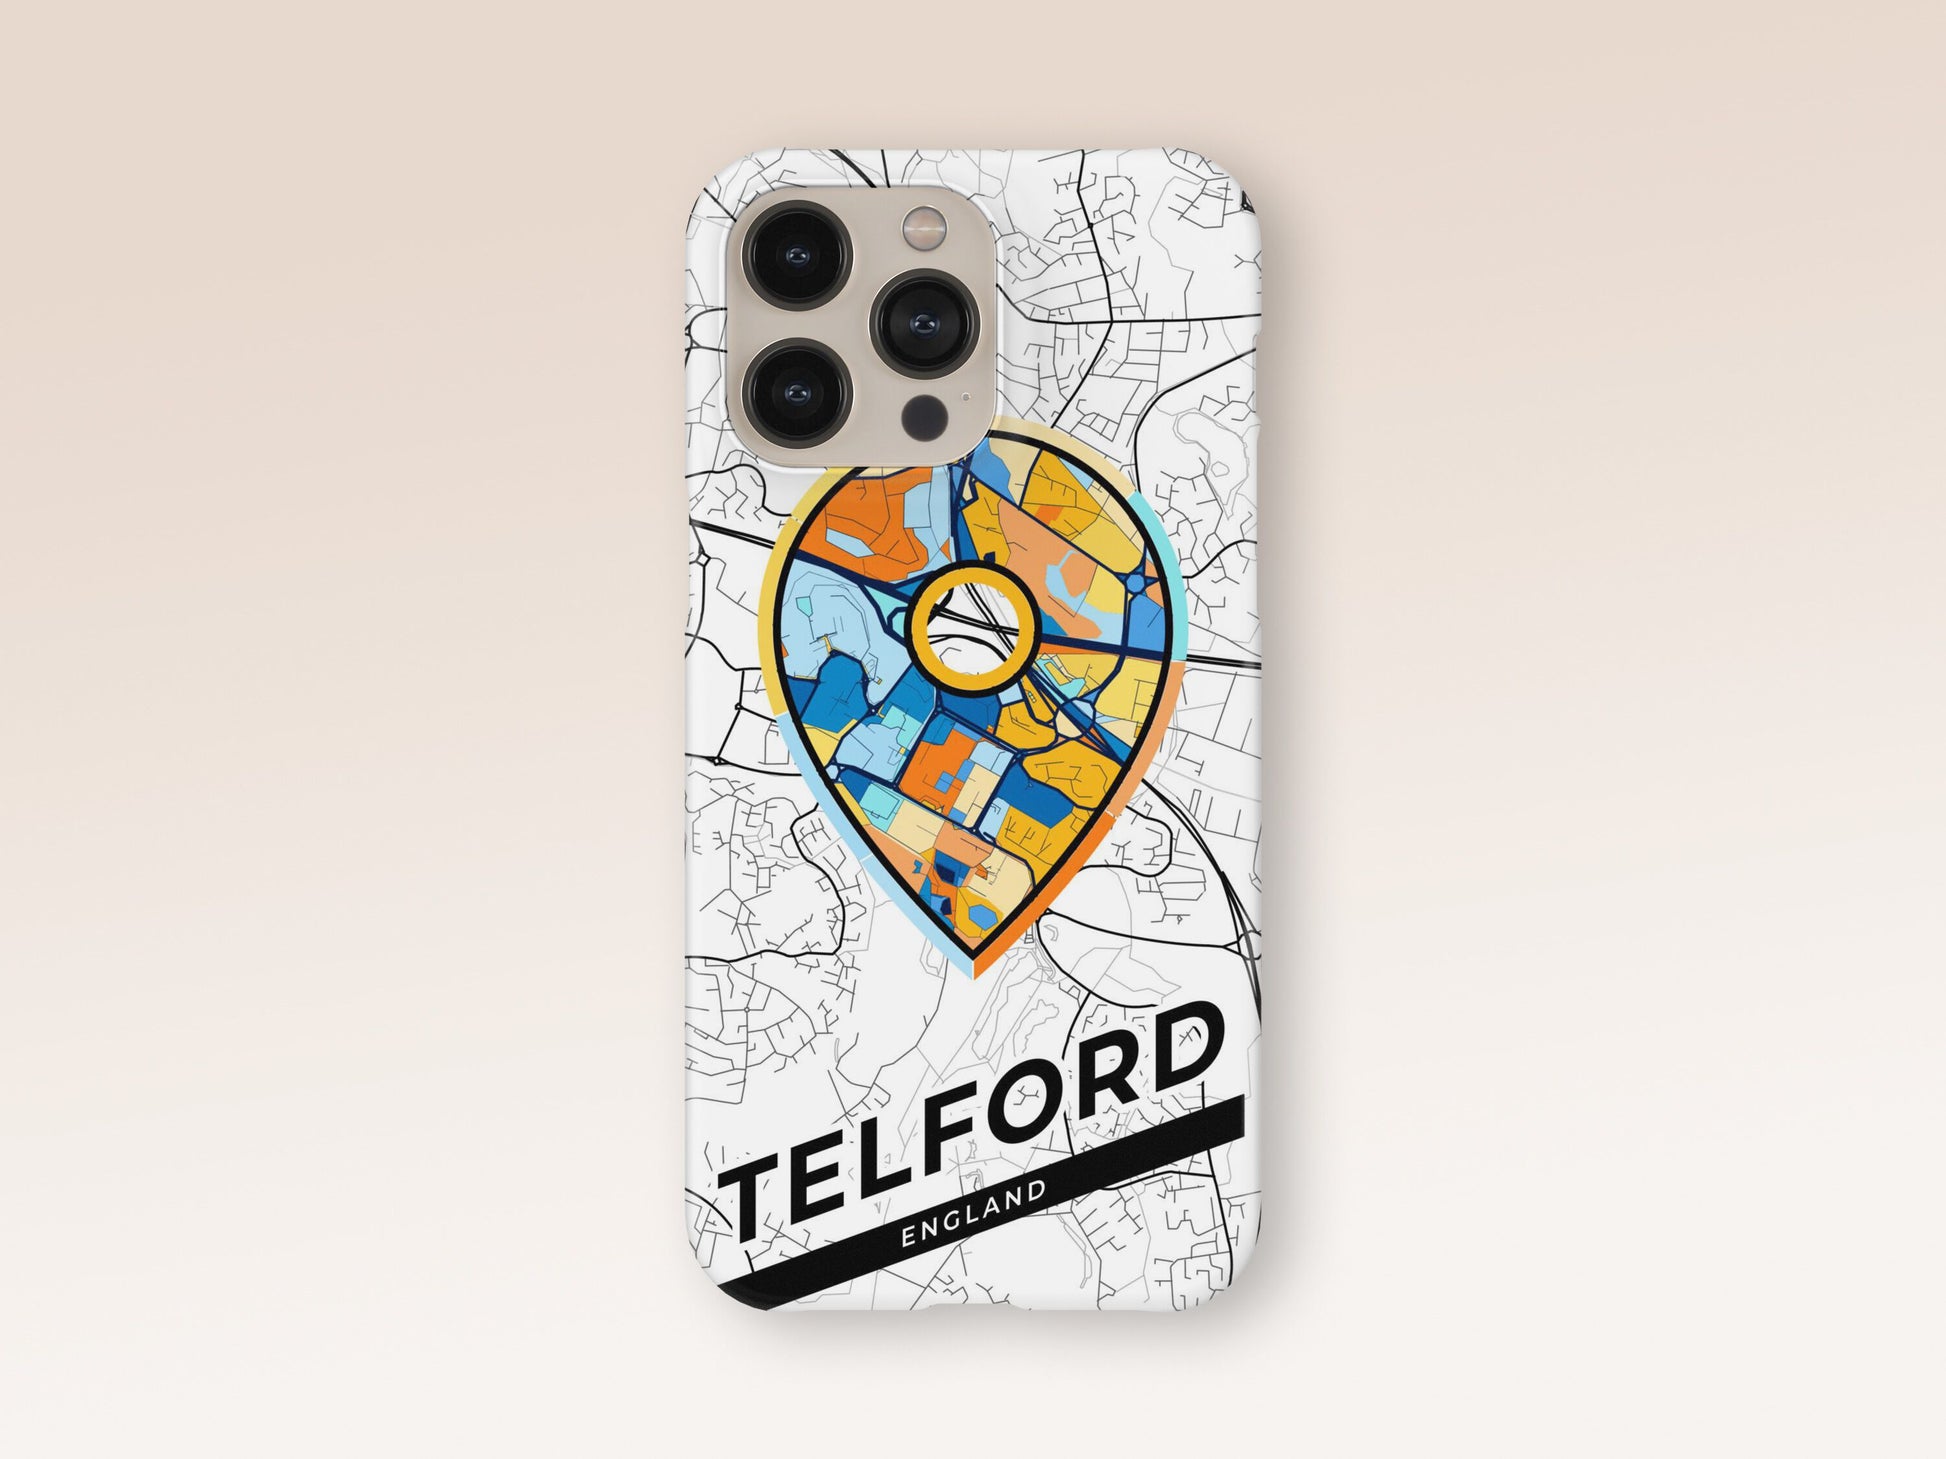 Telford England slim phone case with colorful icon 1